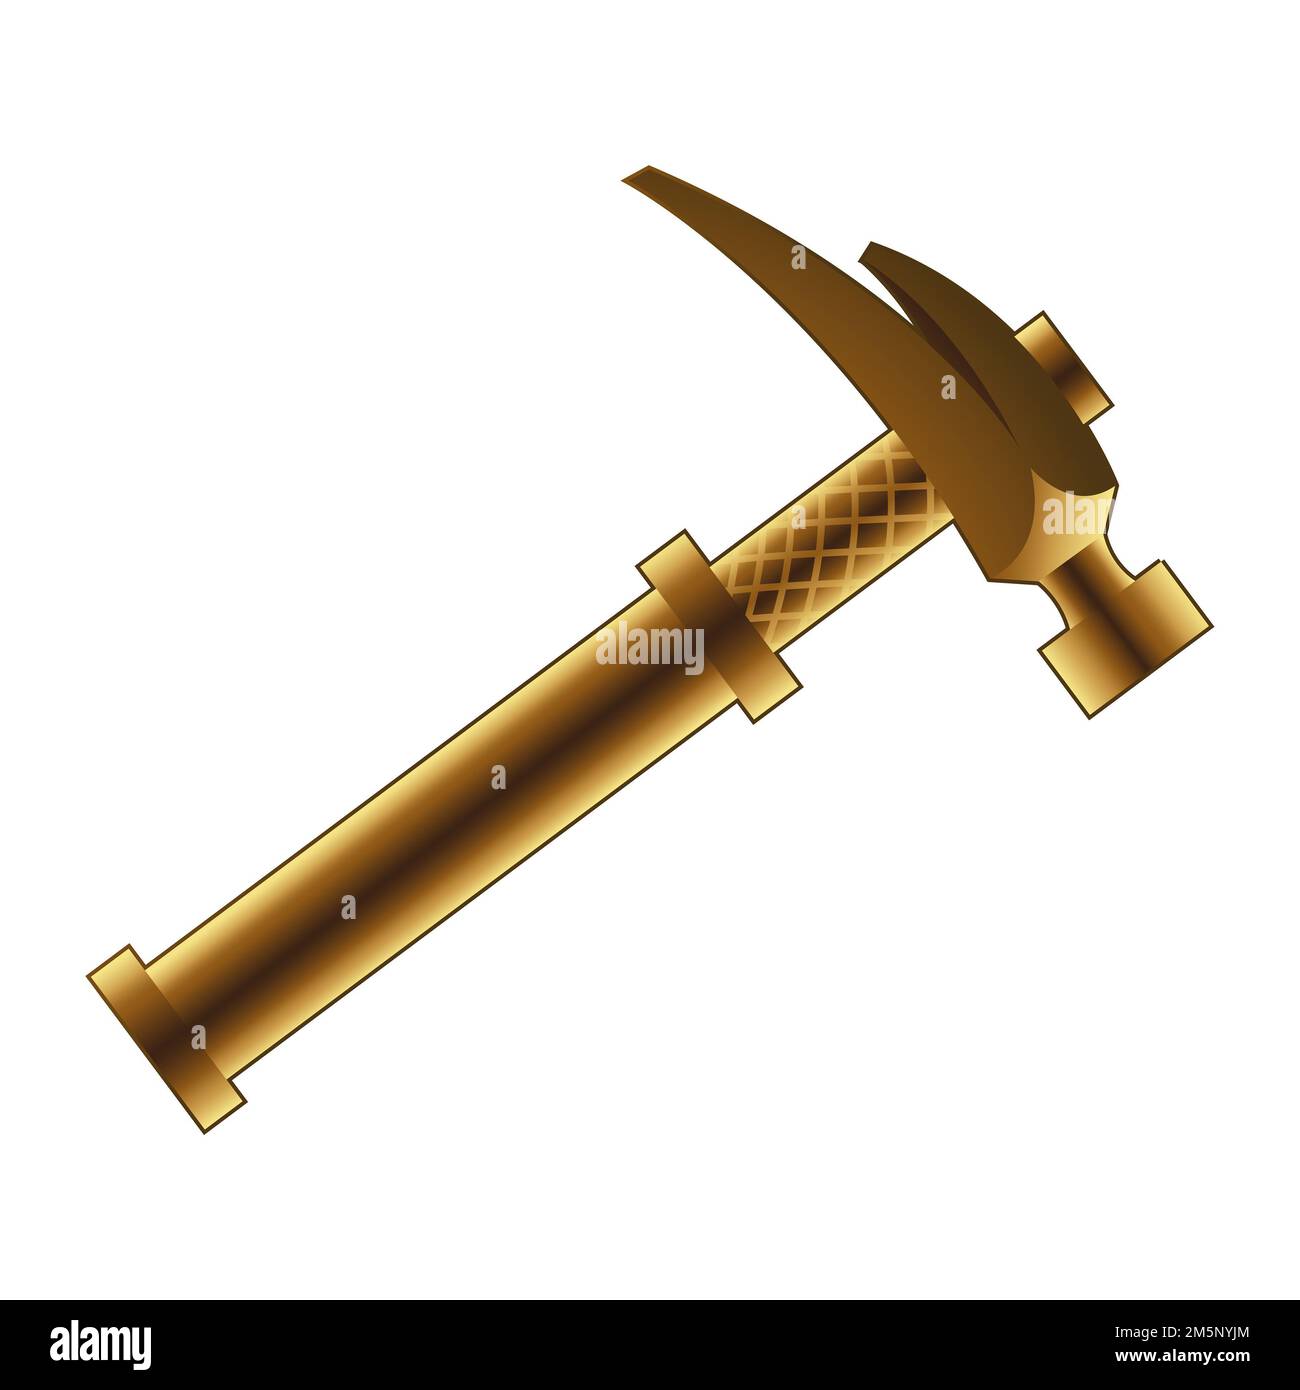 Golden Hammer on a White Background Stock Photo - Alamy